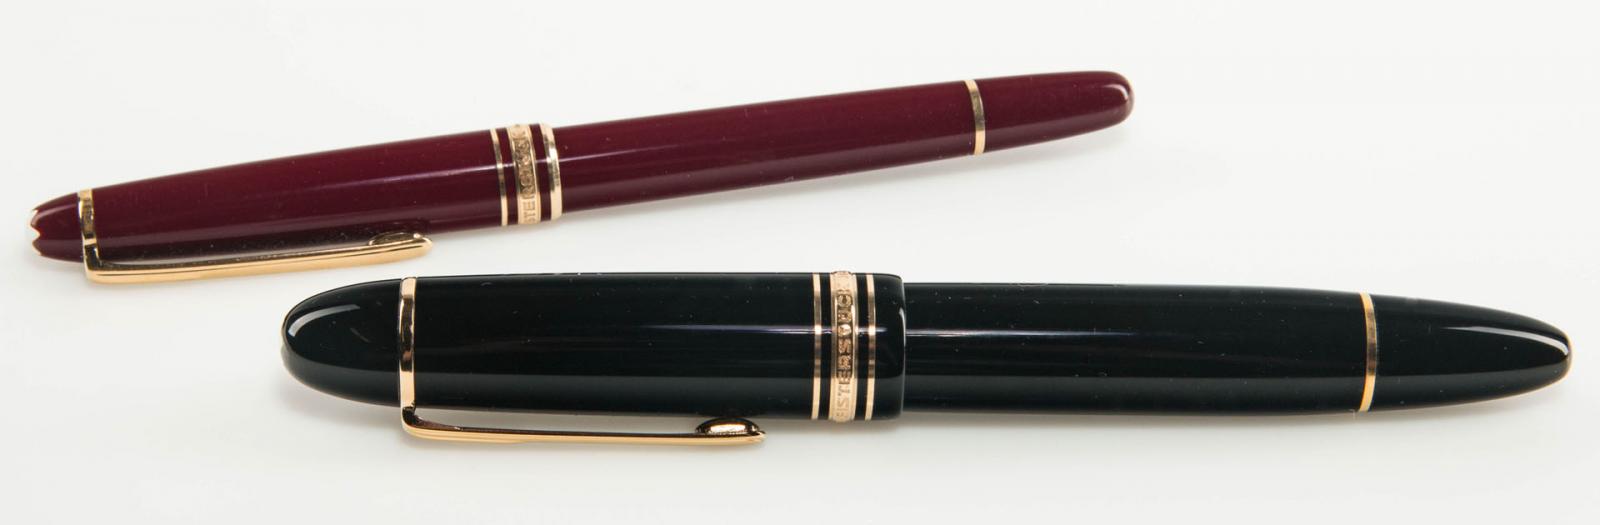 TWO MODERN MONTBLANC MEISTERSTUCK FOUNTAIN PENS